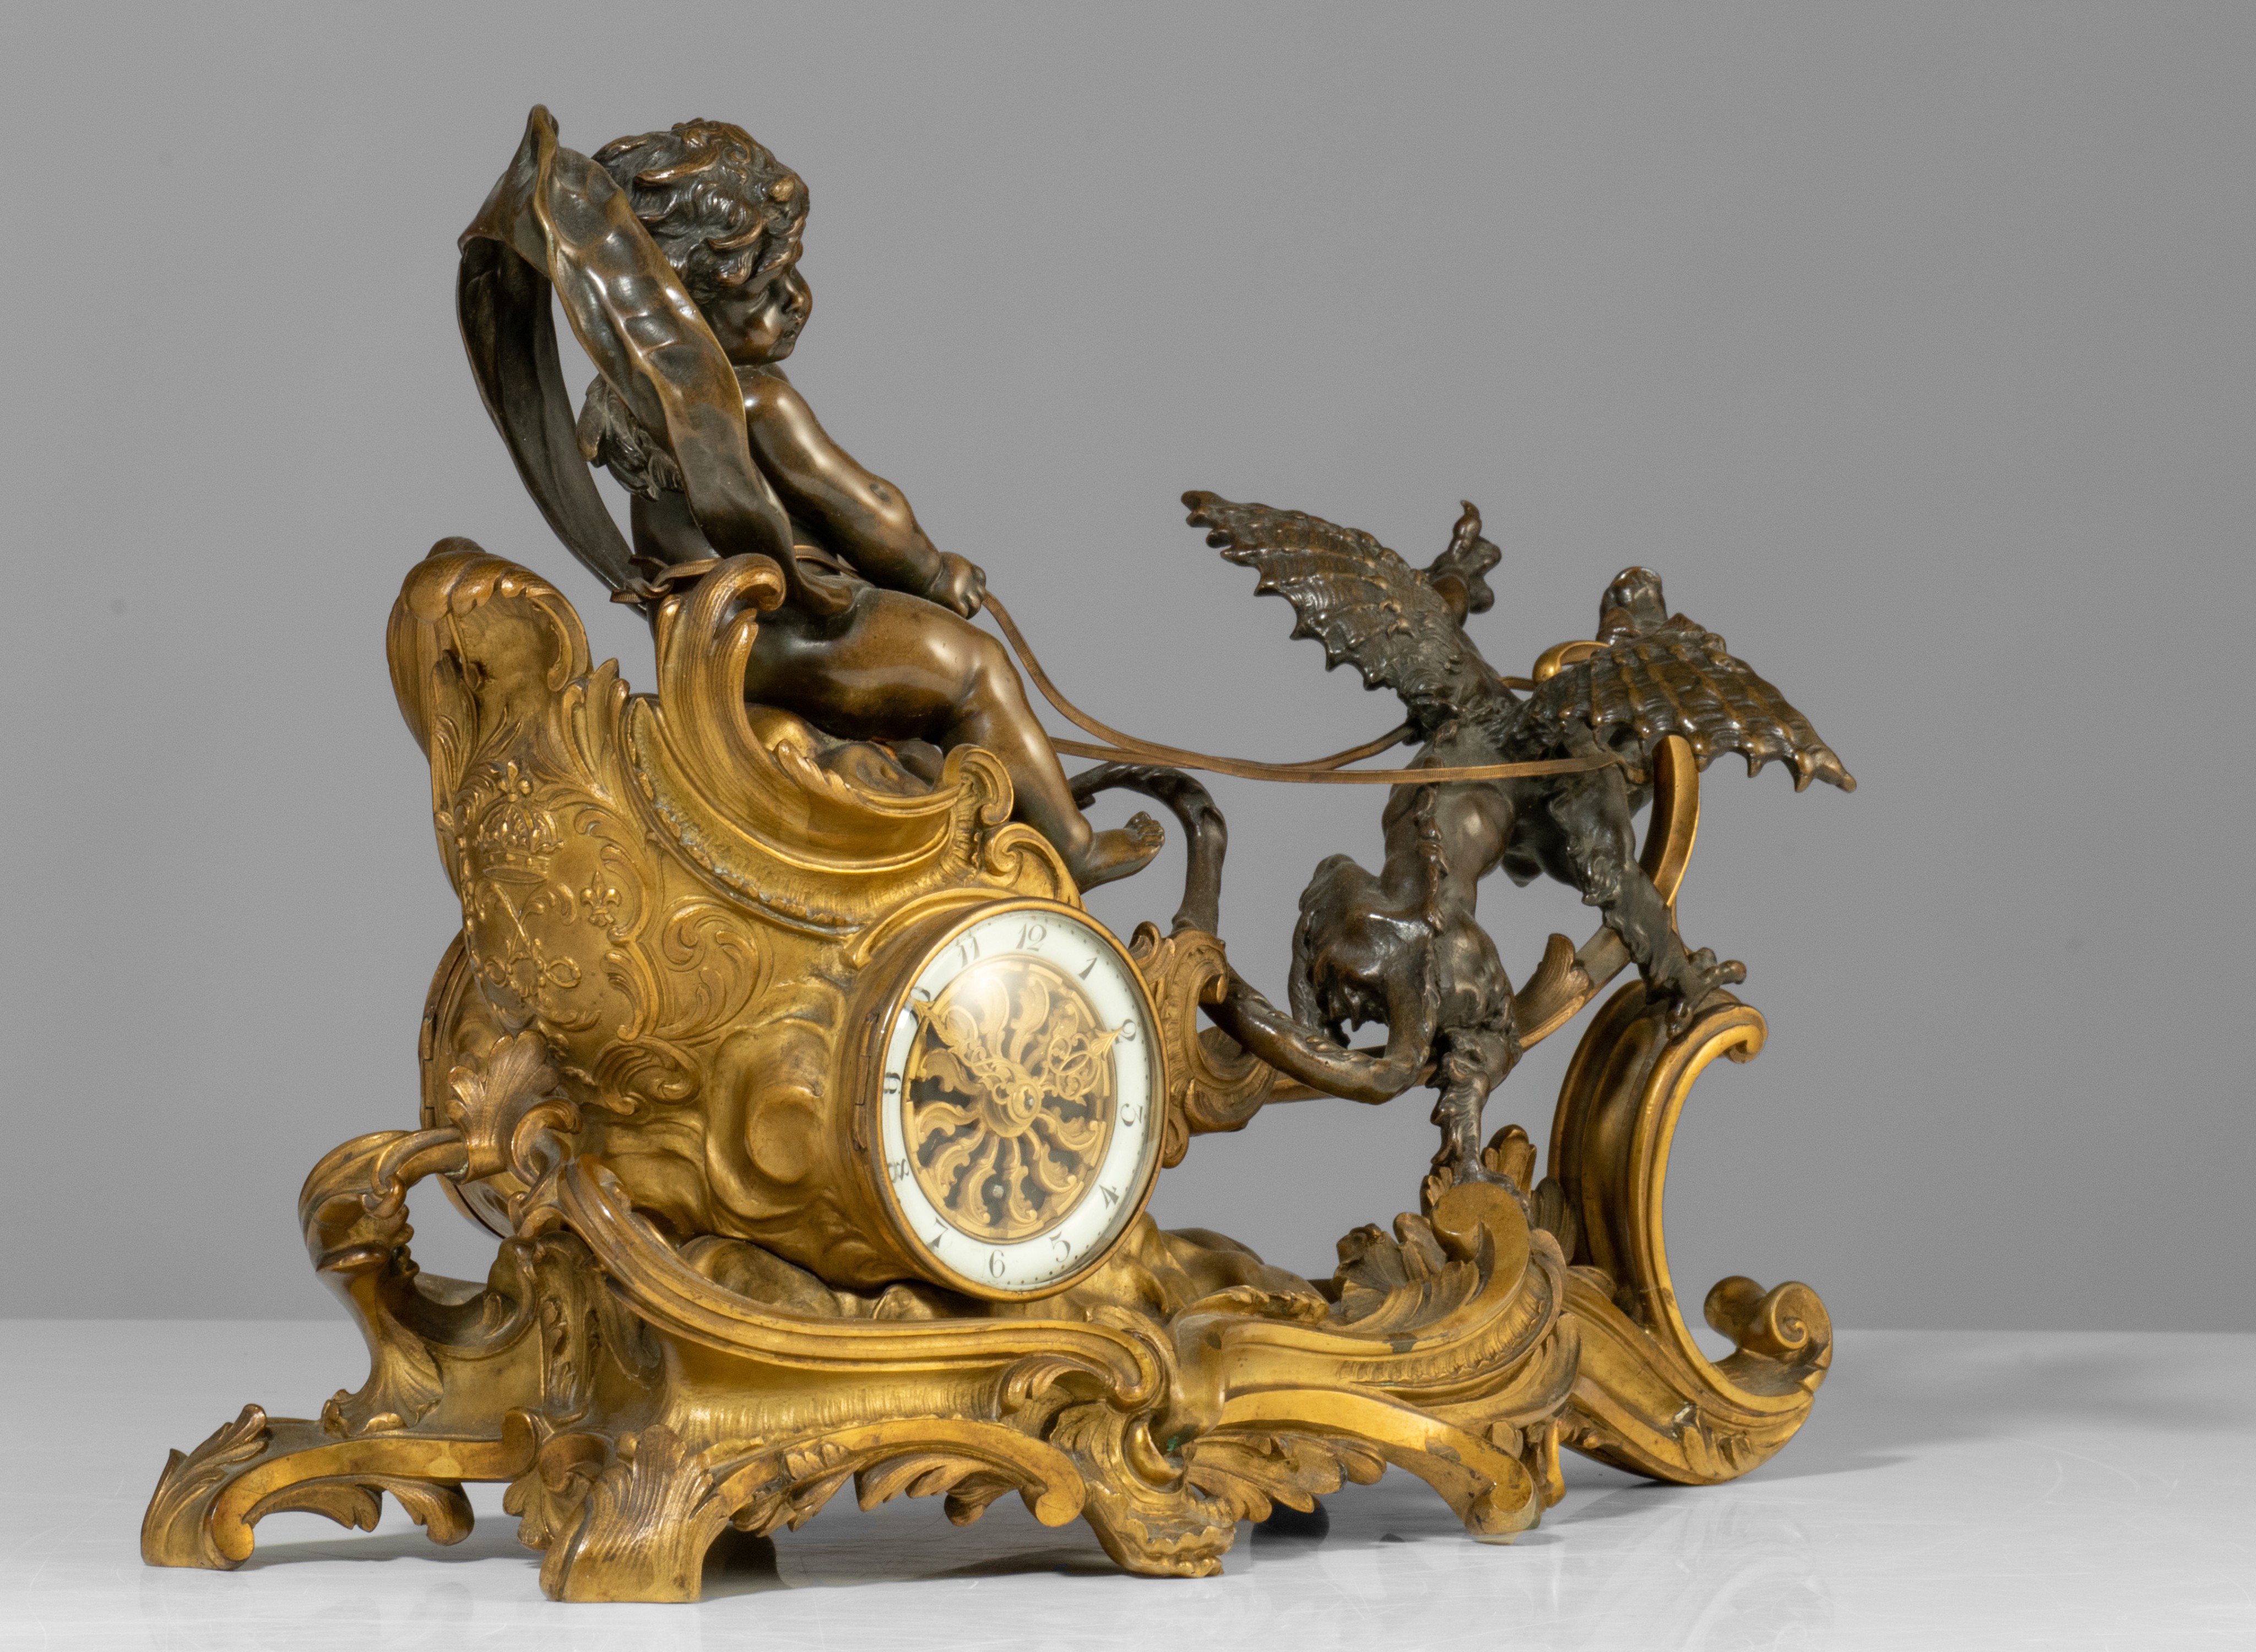 A Rococo style mantle clock with Cupid on his chariot and a pair of matching candlesticks, H 19,5 - - Image 5 of 9